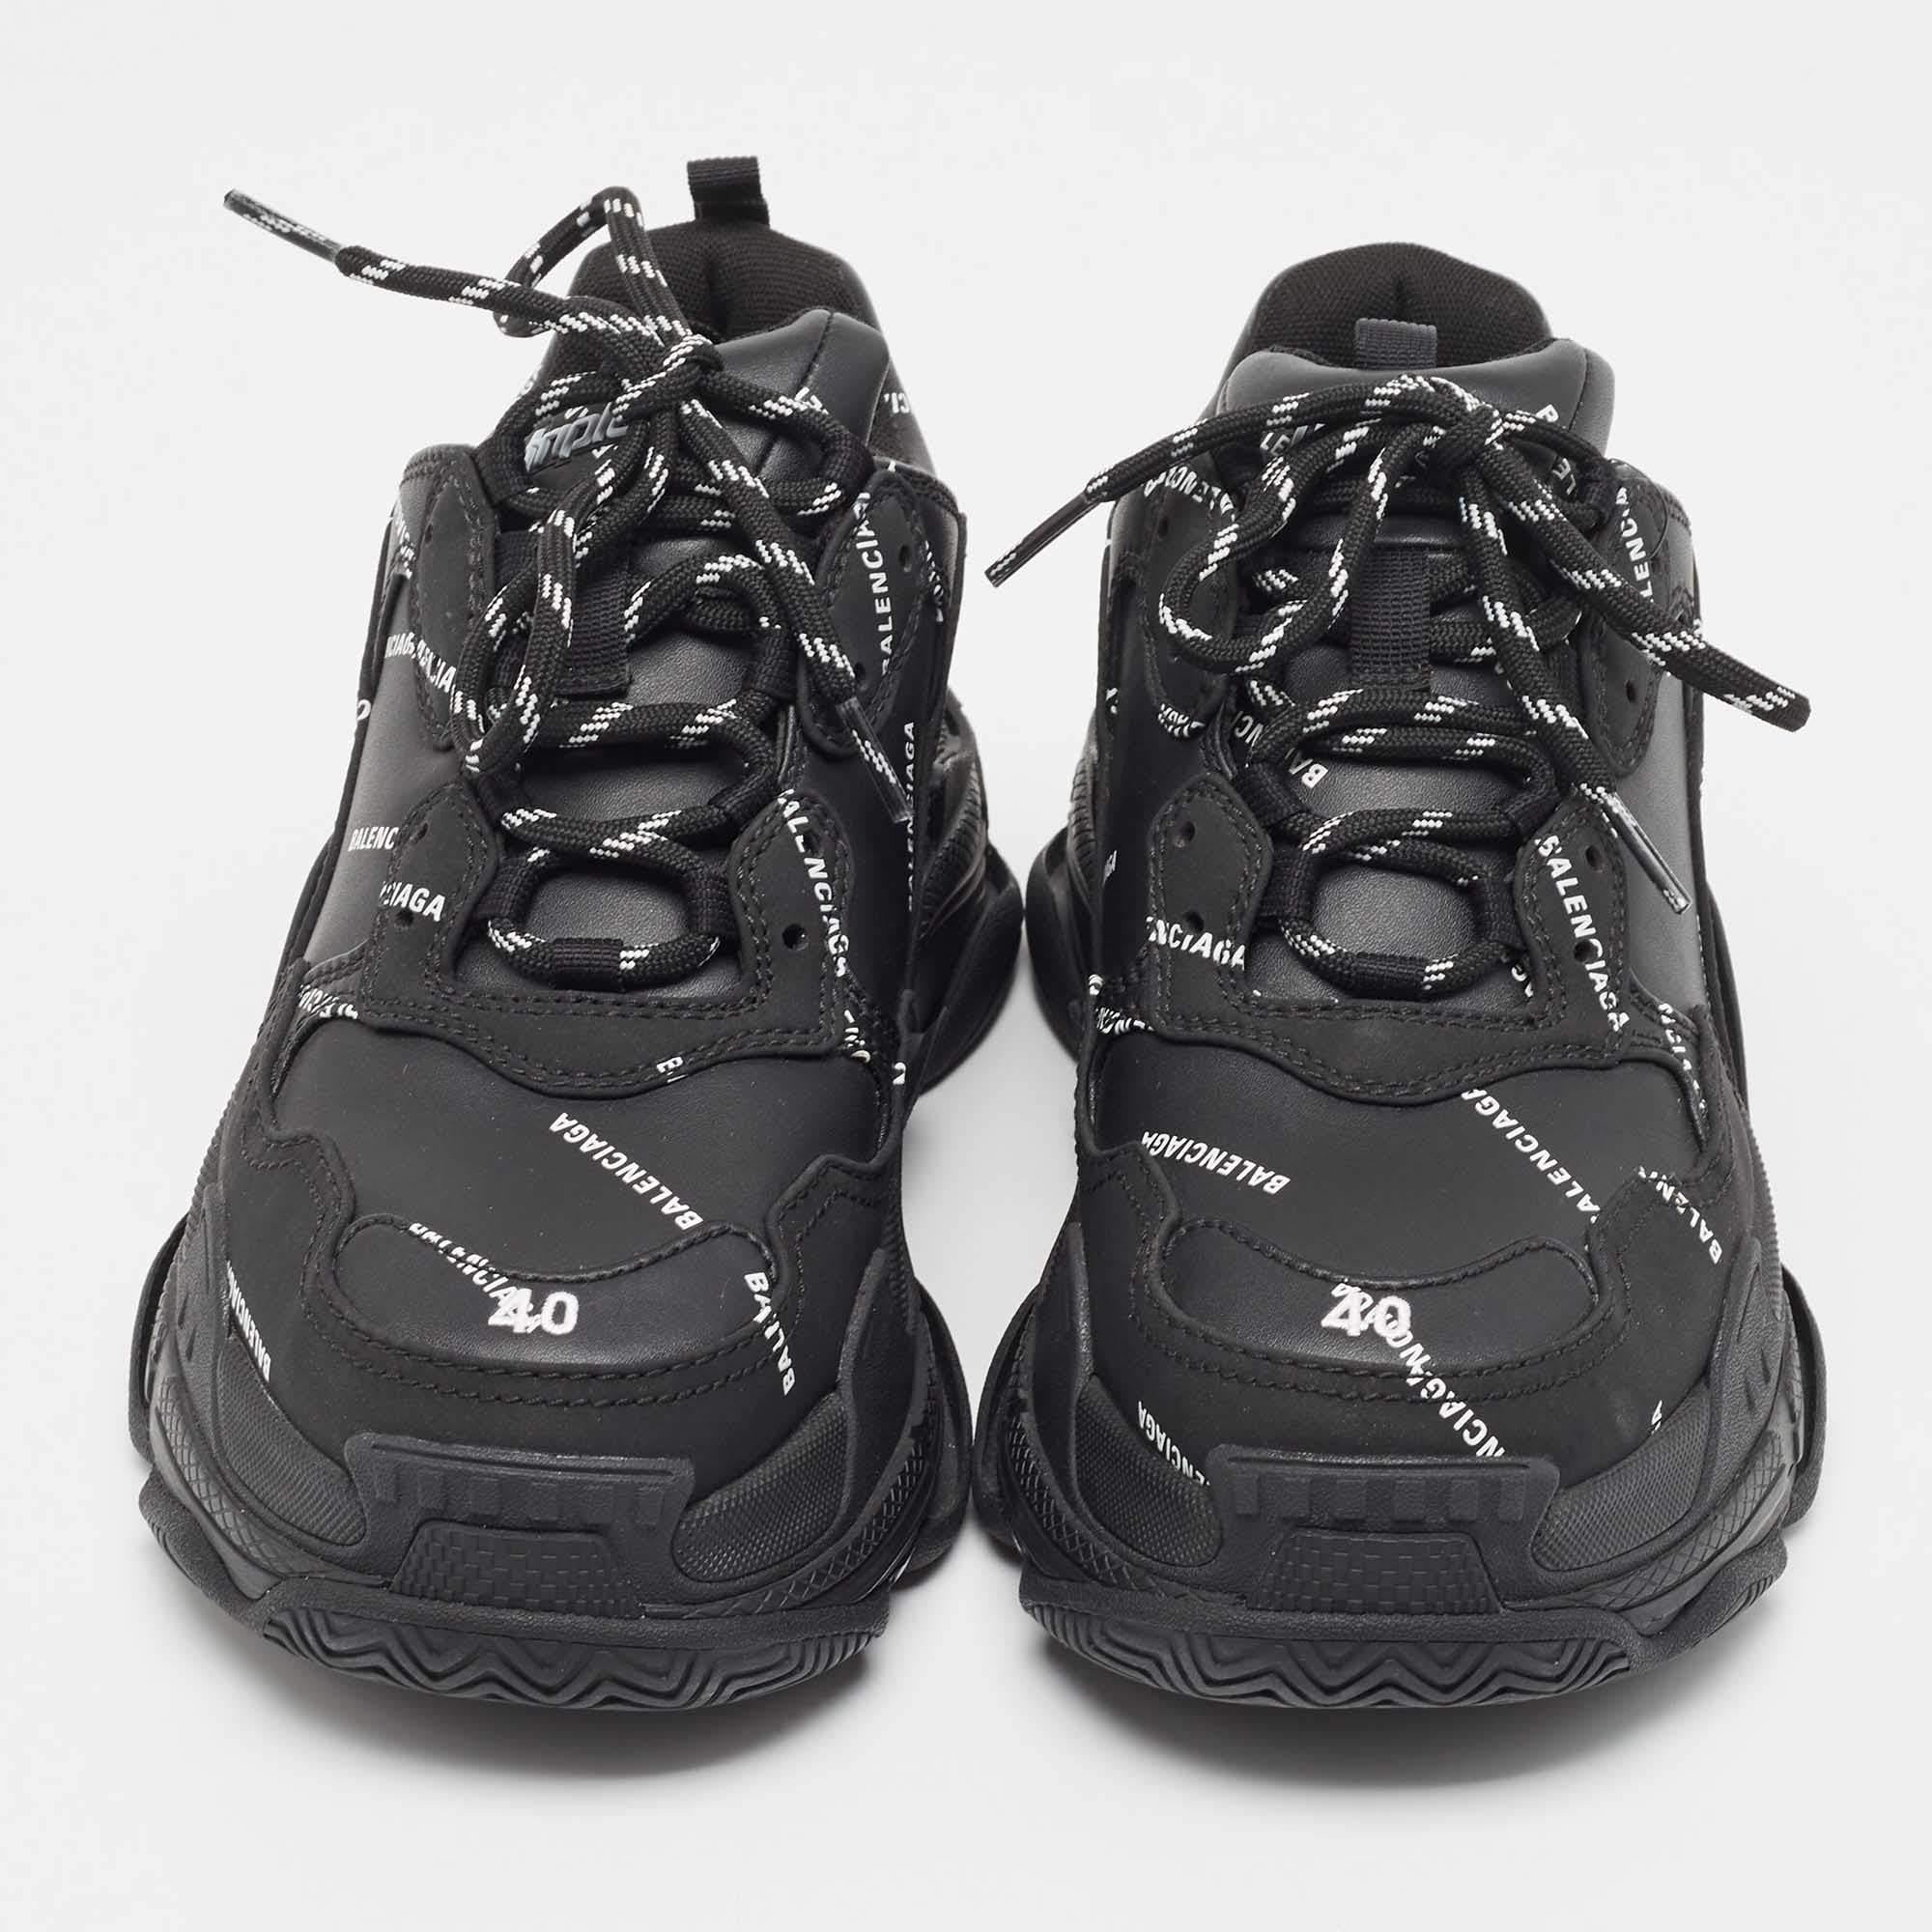 The Triple S by Balenciaga is one of the most famous sneaker designs in the world. These are crafted from a mix of materials into a chunky size, achieved by the high complex soles. They feature the shoe size on the tip of the toes, the label on the